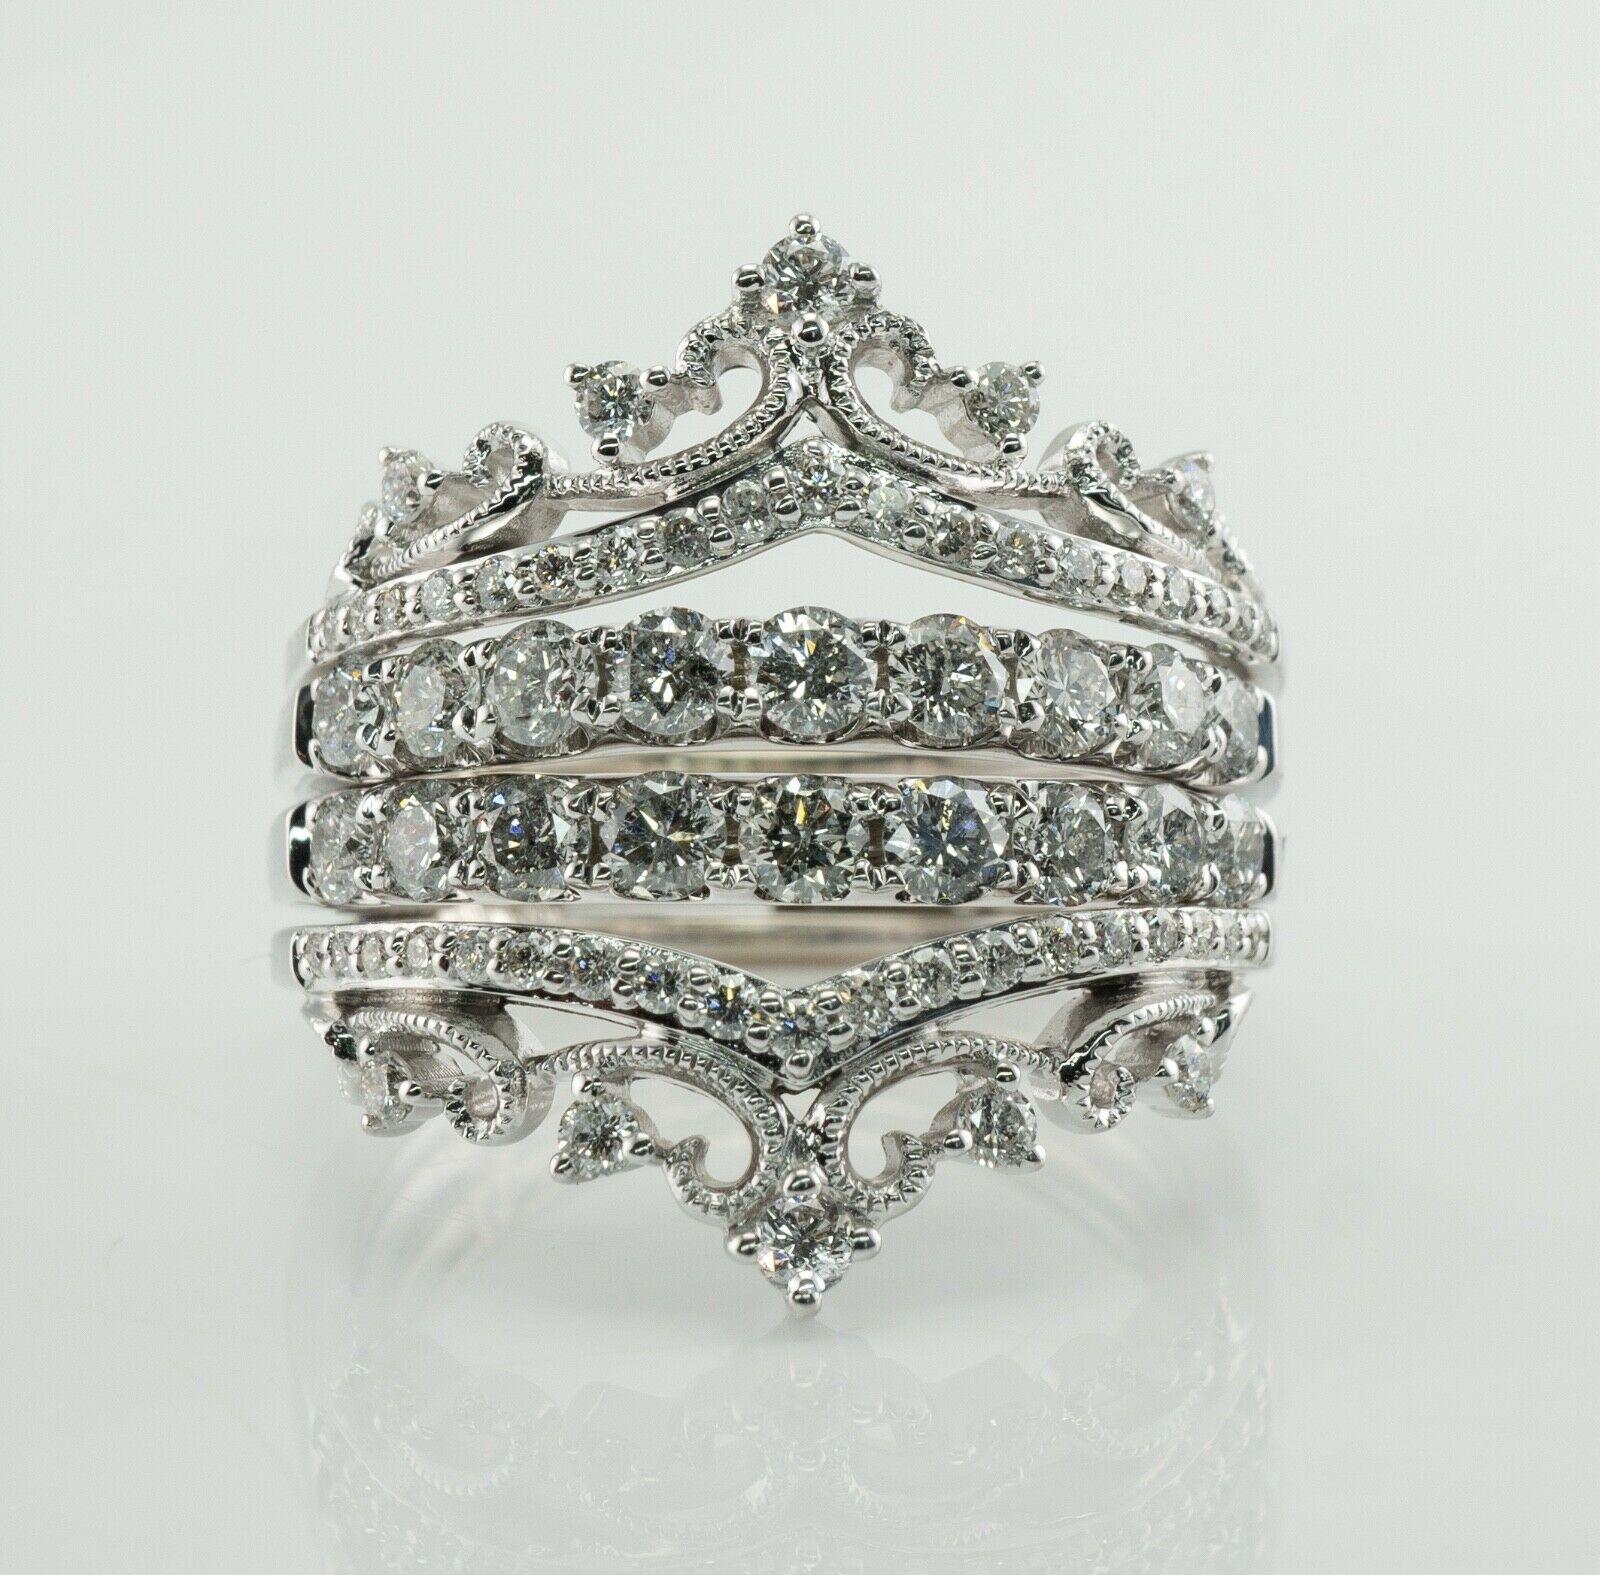 This estate ring is finely crafted in solid 14K White gold in the shape of a crown or tiara.
There are 66 round cut diamonds totaling 1.75 carat total weight for the ring.
The diamonds range from SI2 to I2 clarity and I color. 
The top of the ring